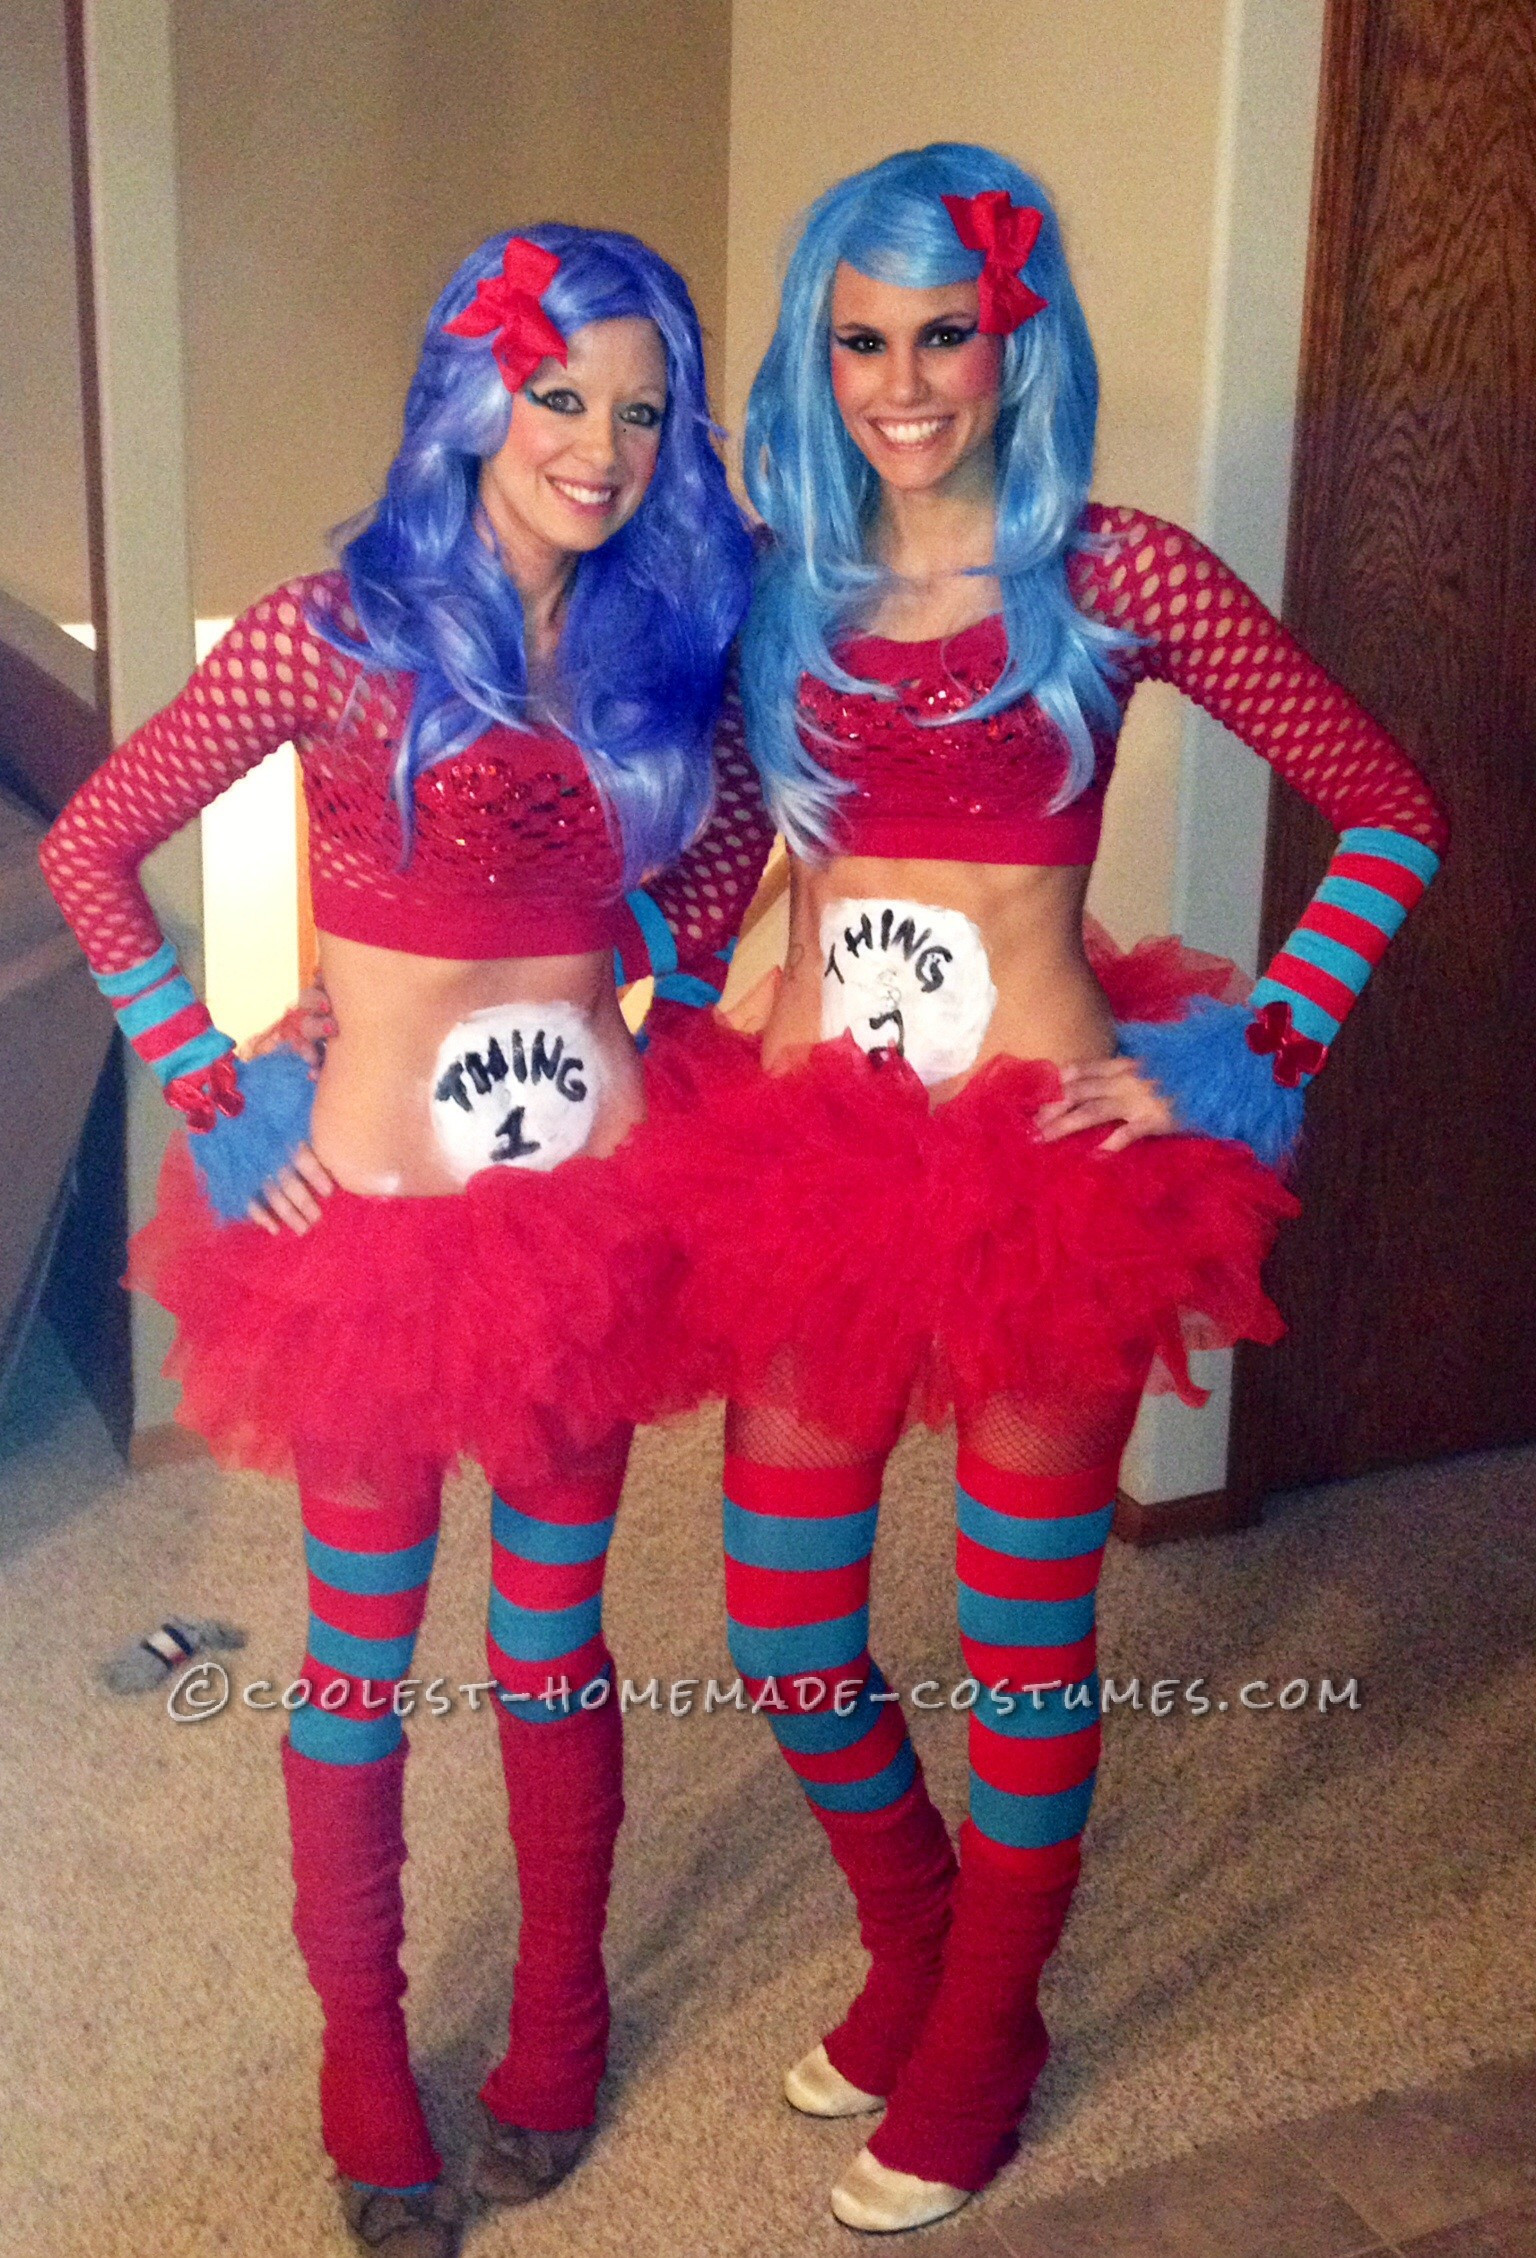 DIY Thing 1 And Thing 2 Costumes
 Coolest Homemade Costumes